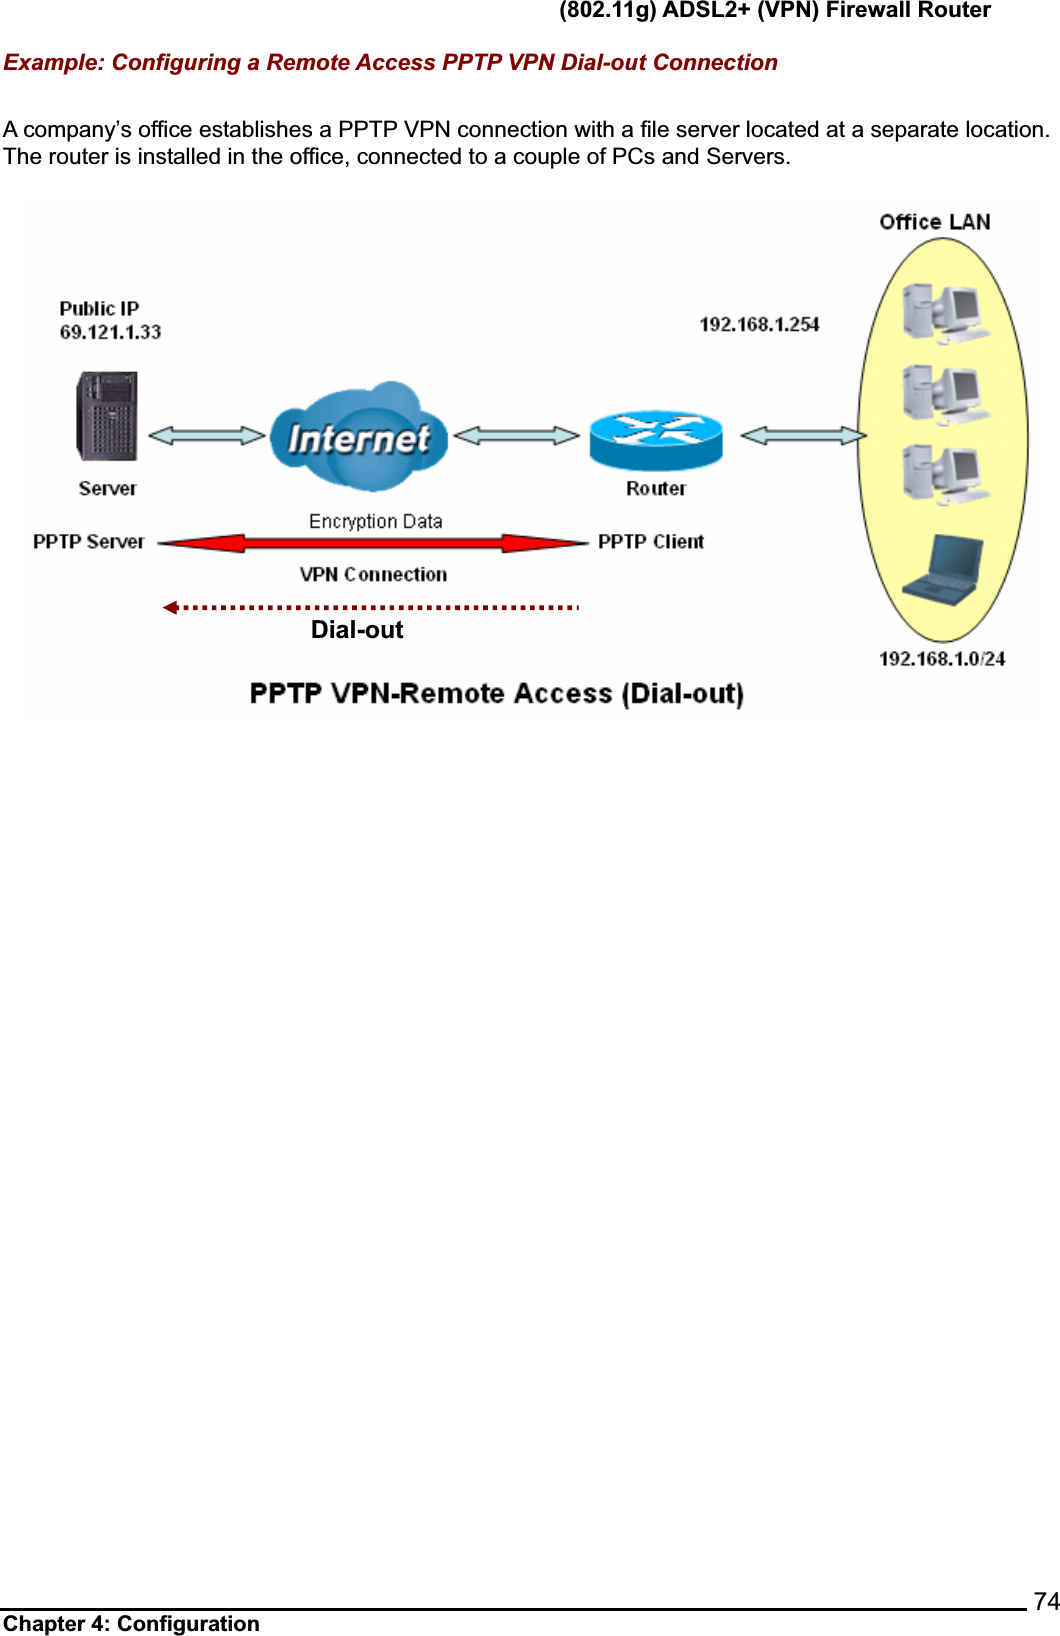      (802.11g) ADSL2+ (VPN) Firewall Router Chapter 4: Configuration    74Example: Configuring a Remote Access PPTP VPN Dial-out Connection A company’s office establishes a PPTP VPN connection with a file server located at a separate location. The router is installed in the office, connected to a couple of PCs and Servers.Dial-out